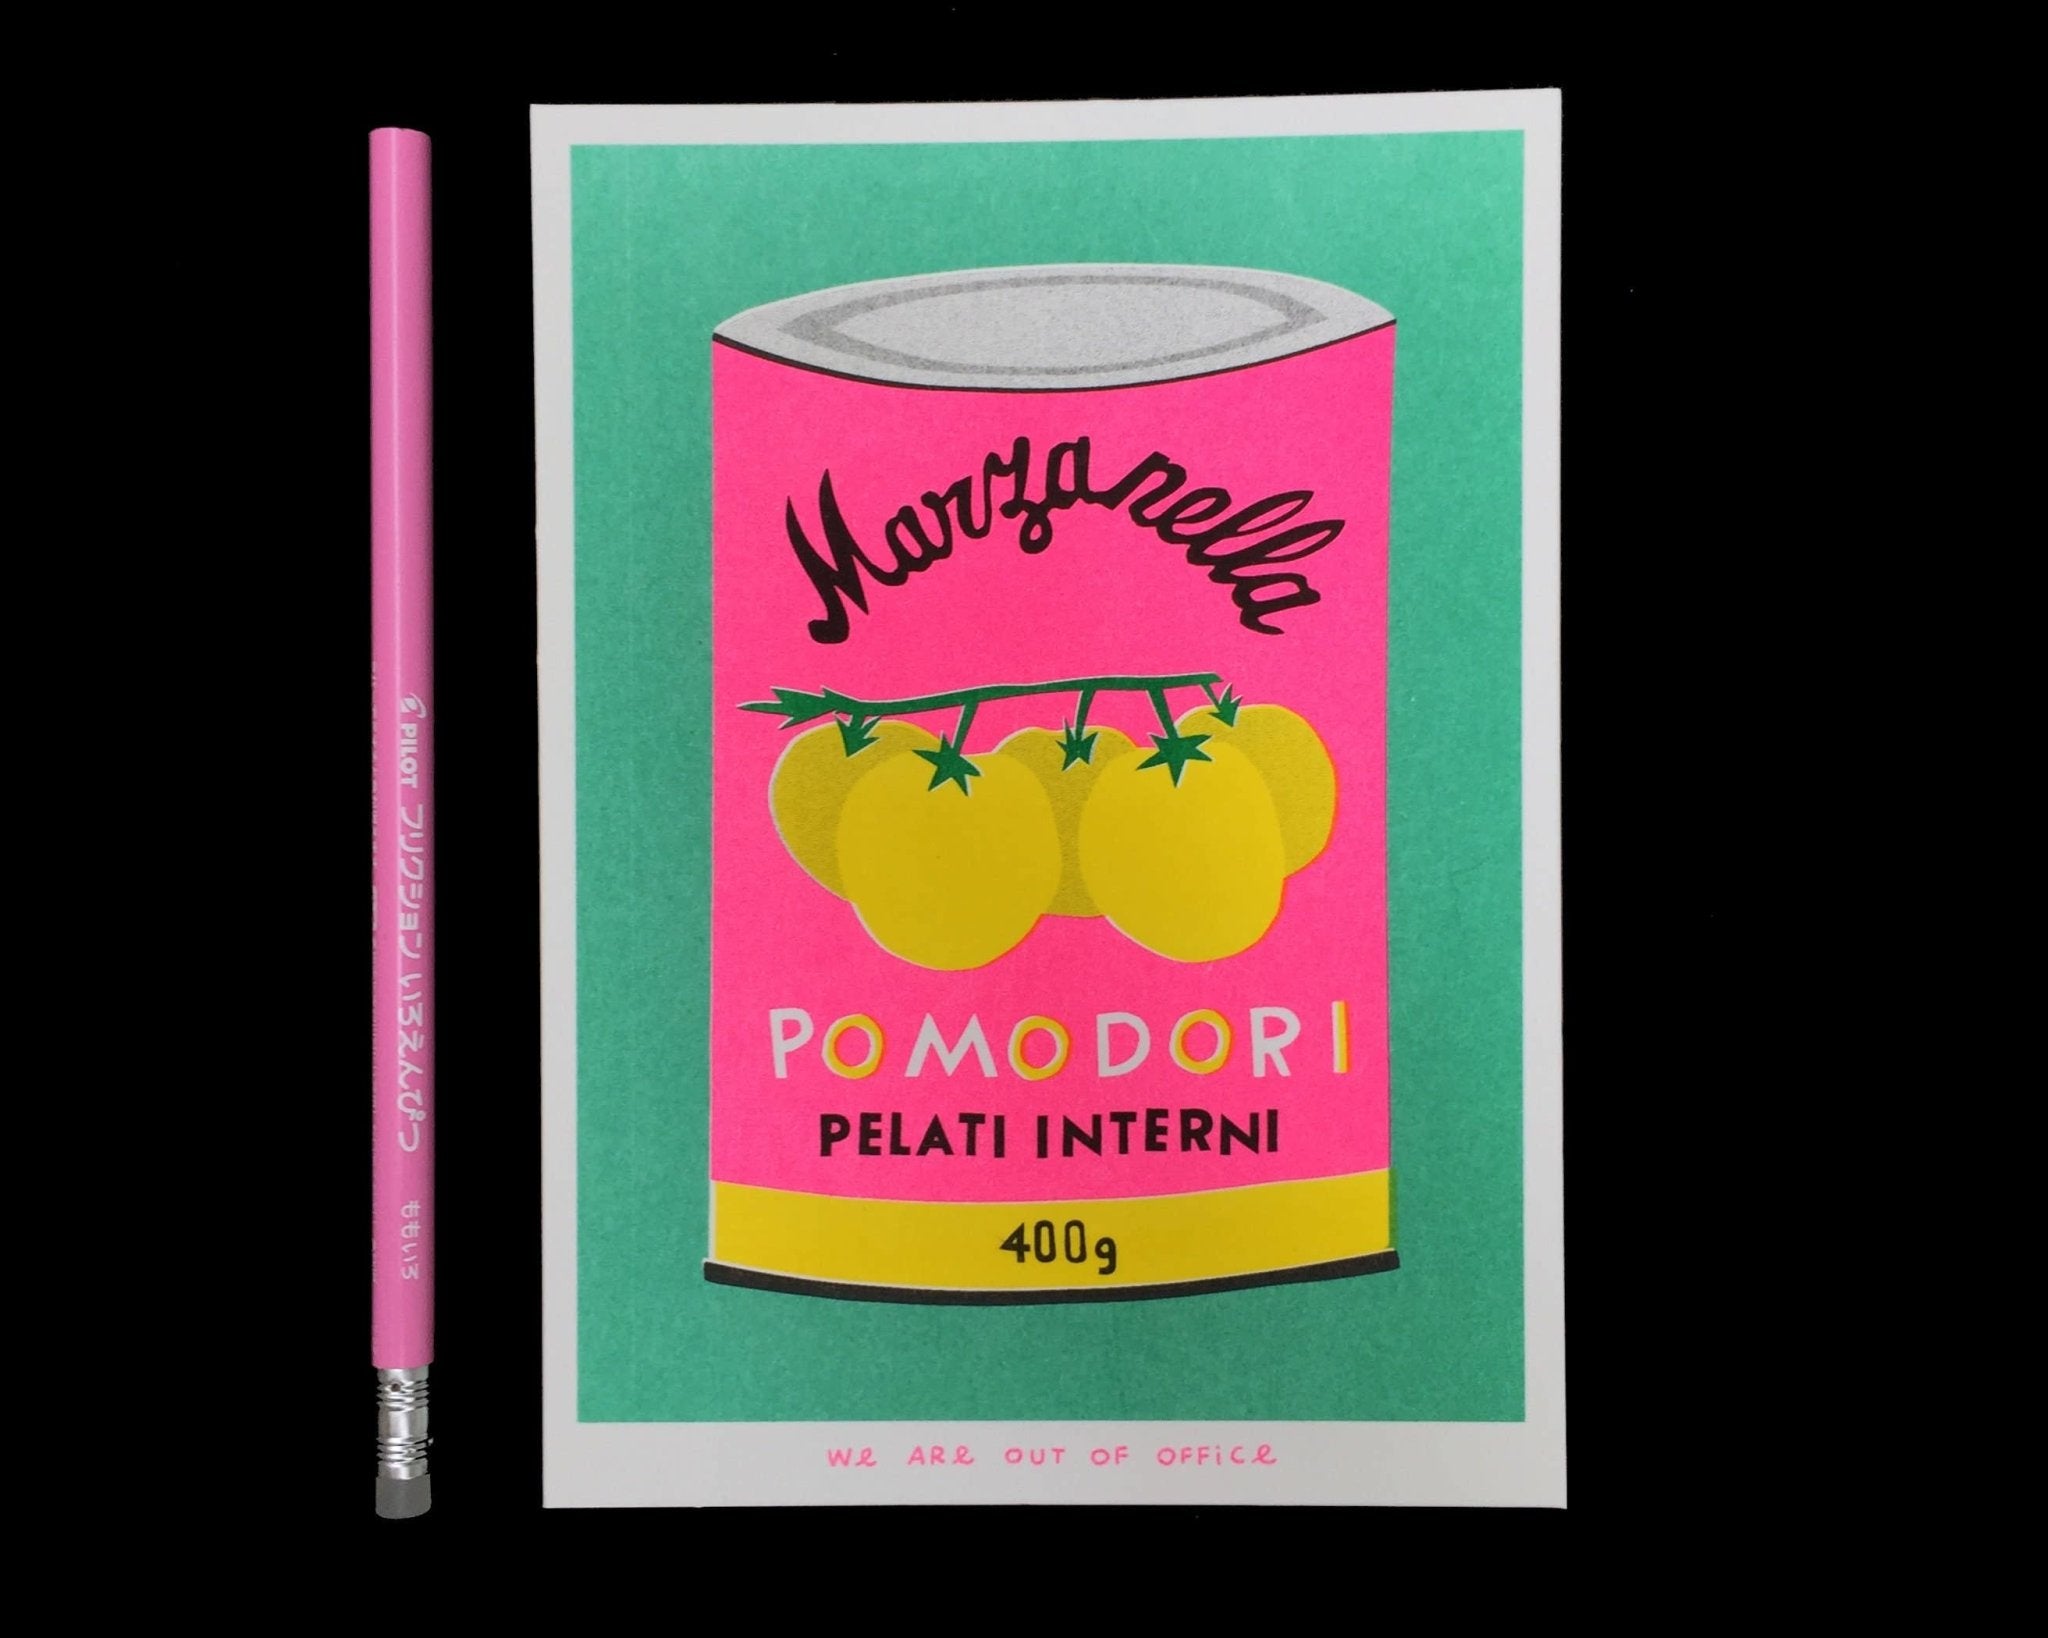 We are out of office - A risograph print of a can of pomodori - Ensemble Studios